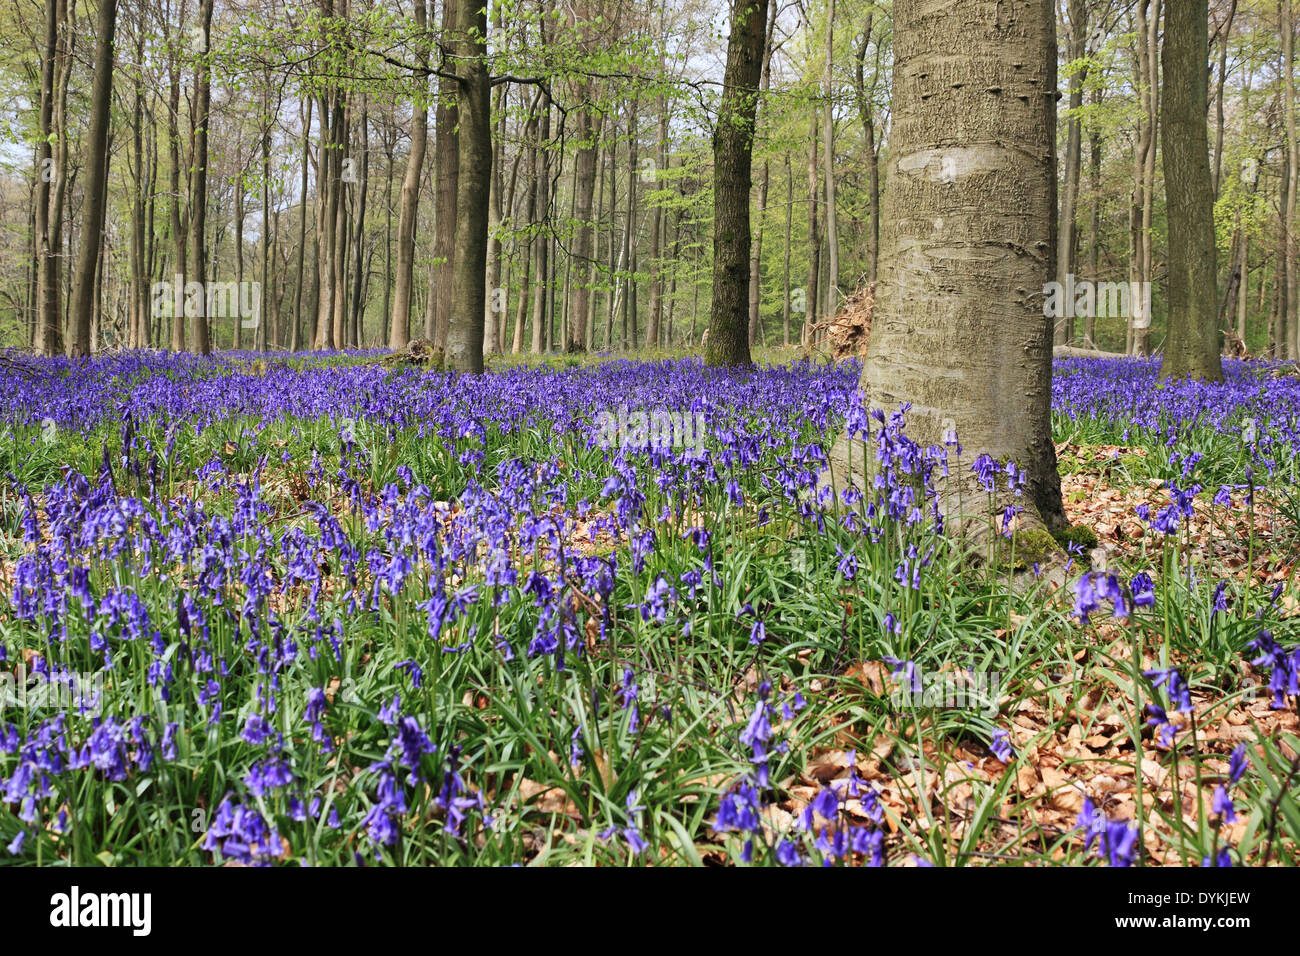 White Down Wood, nr Dorking, Surrey, England, UK. 21st April 2014.  The bluebells are in full bloom in this woodland on the North Downs near to Dorking in Surrey. The blue carpet of traditional English Bluebells (Hyacinthoides non-scripta) look magnificent in the sunshine. Credit:  Julia Gavin/Alamy Live News Stock Photo